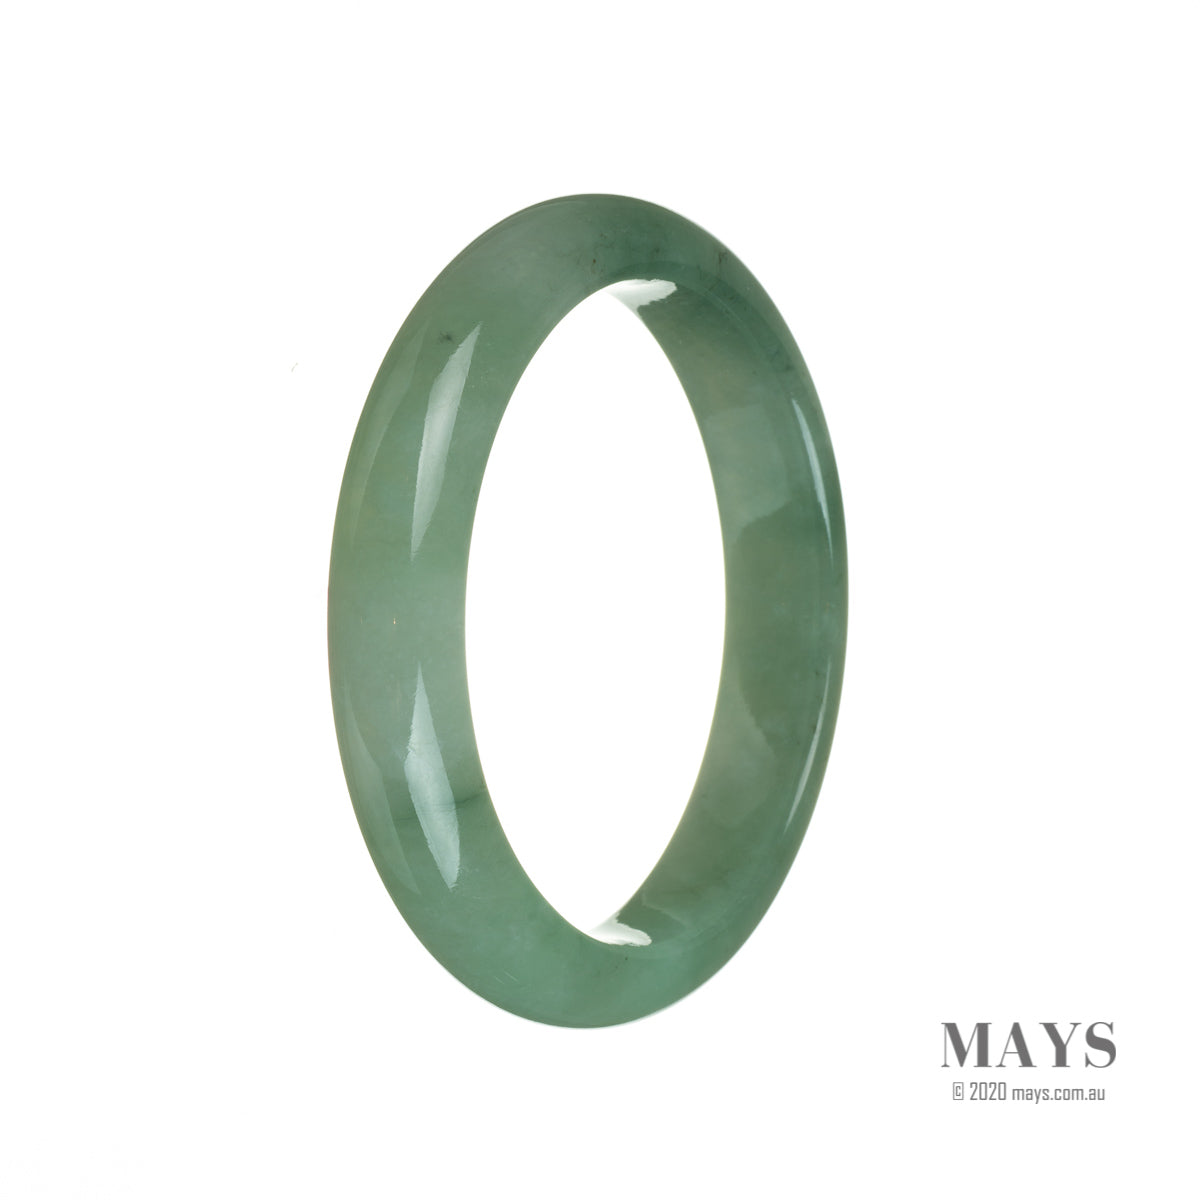 A close-up of a beautiful green jadeite bracelet with a semi-round shape, measuring 59mm in diameter. This genuine type A jadeite is a stunning piece of jewelry from MAYS.